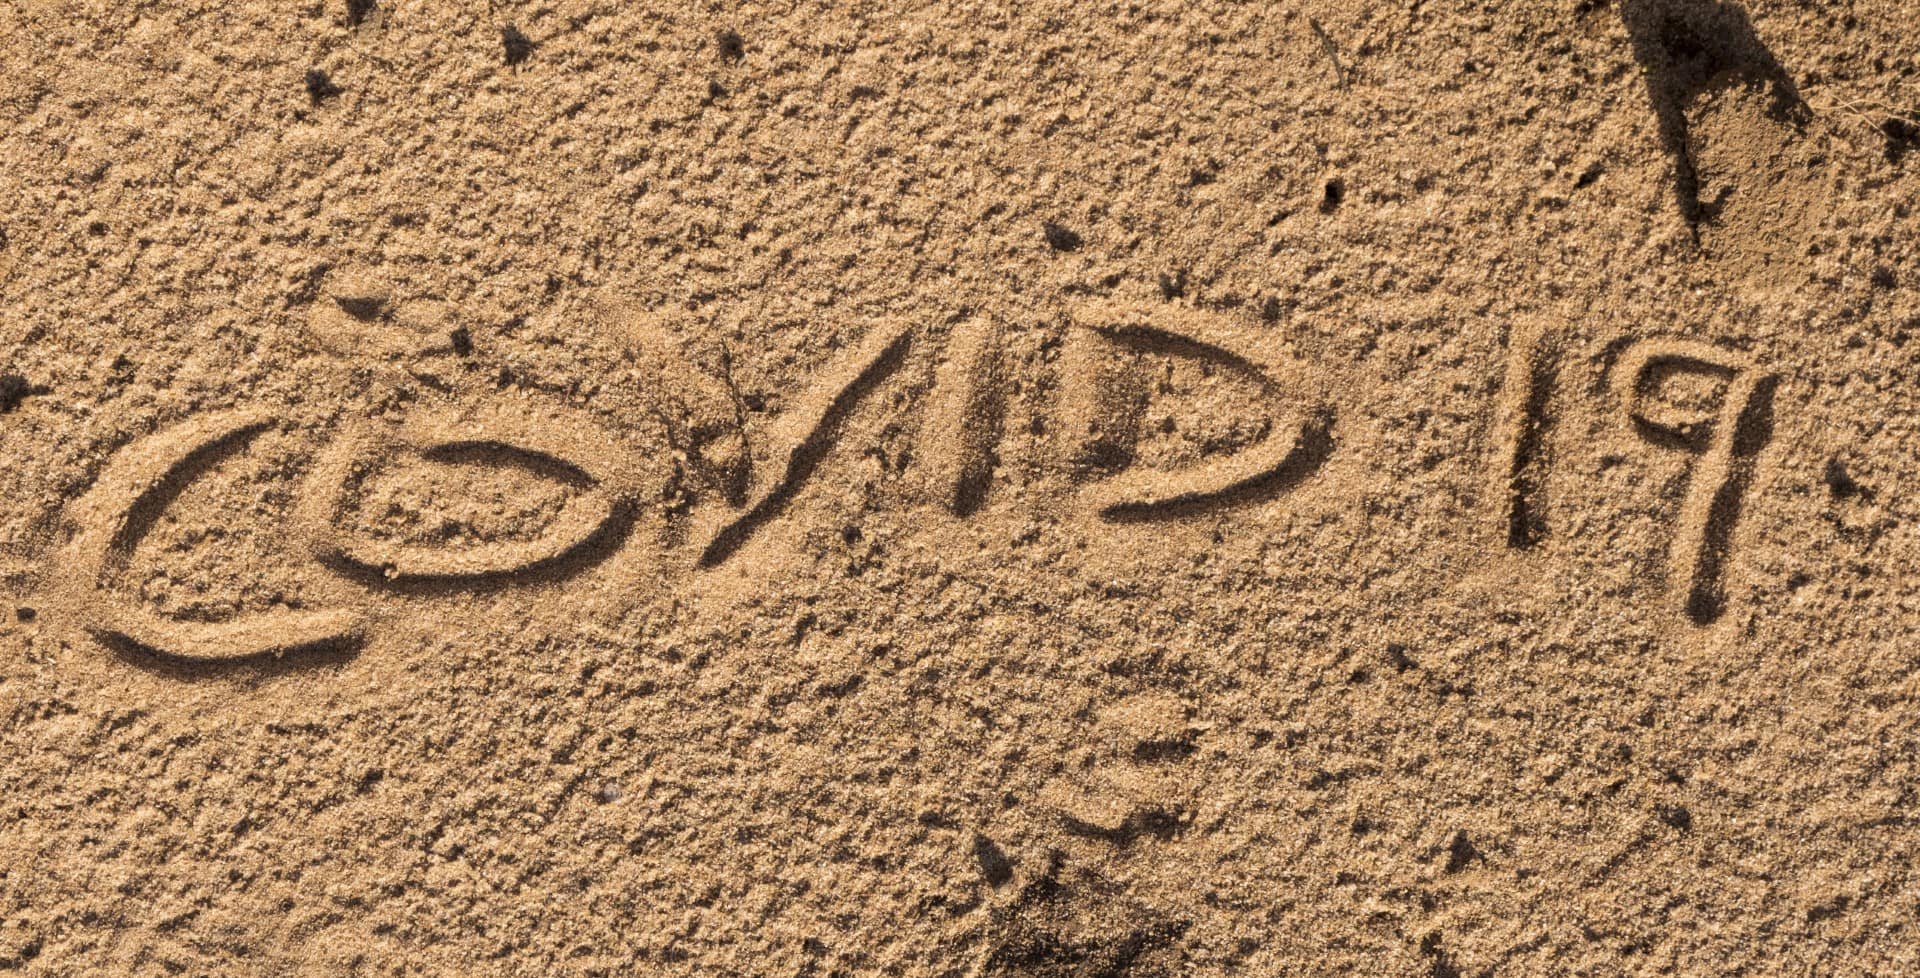 Covid 19 name written in sand